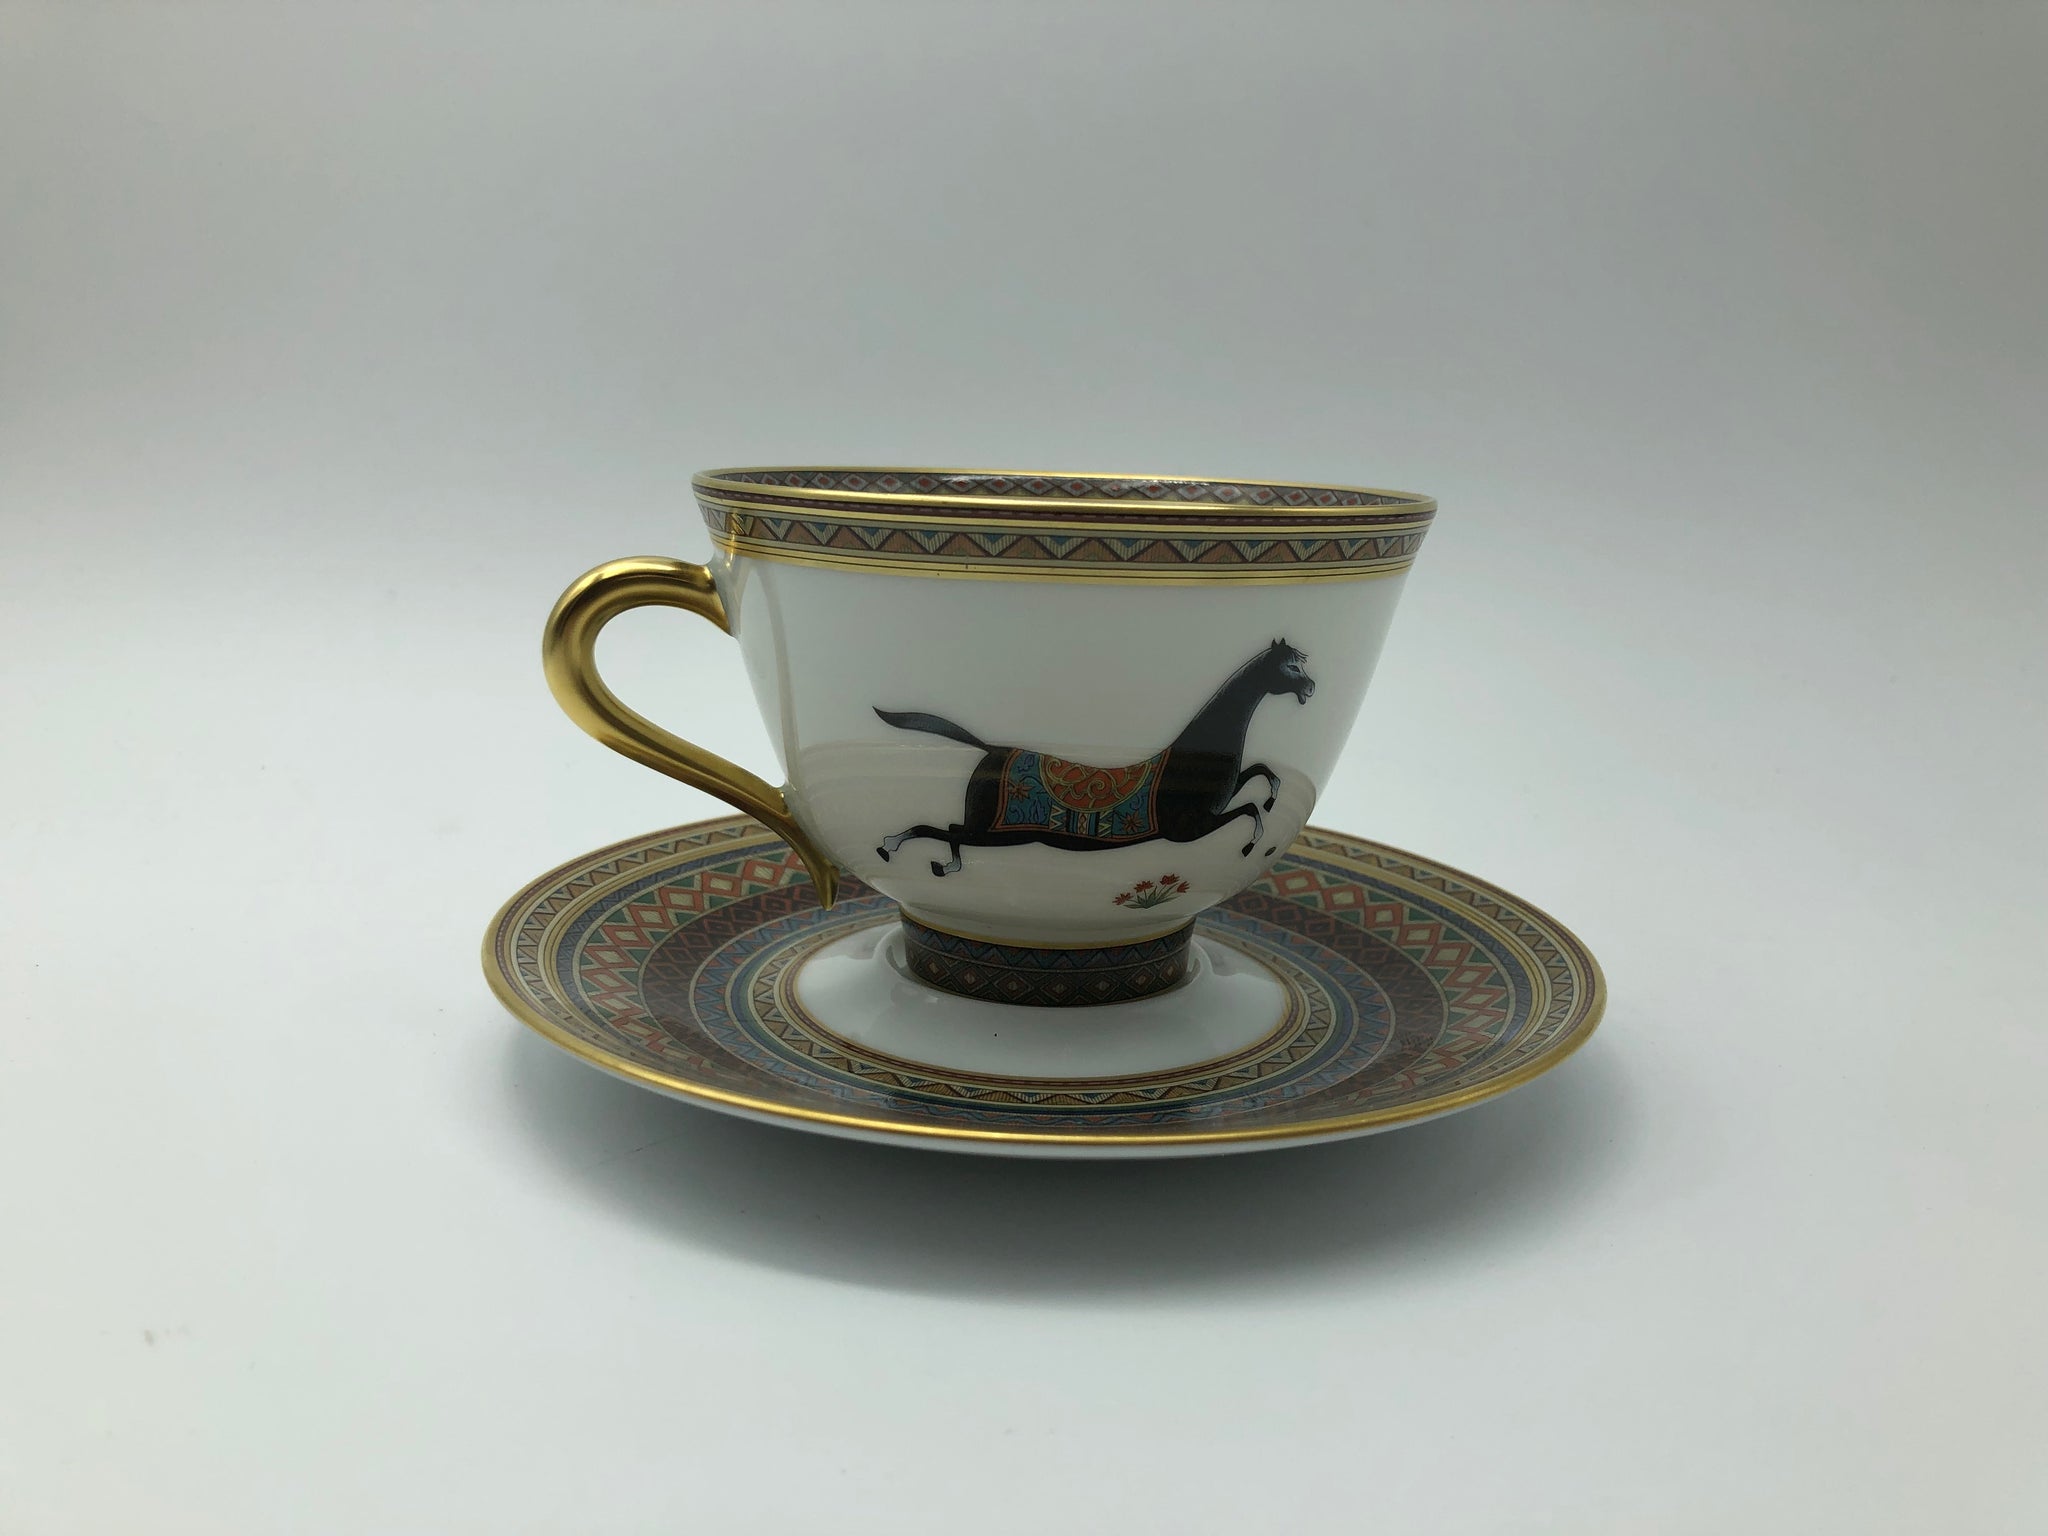 Hermes Cheval D'Orient Teacup and Saucer No 2  BRAND NEW